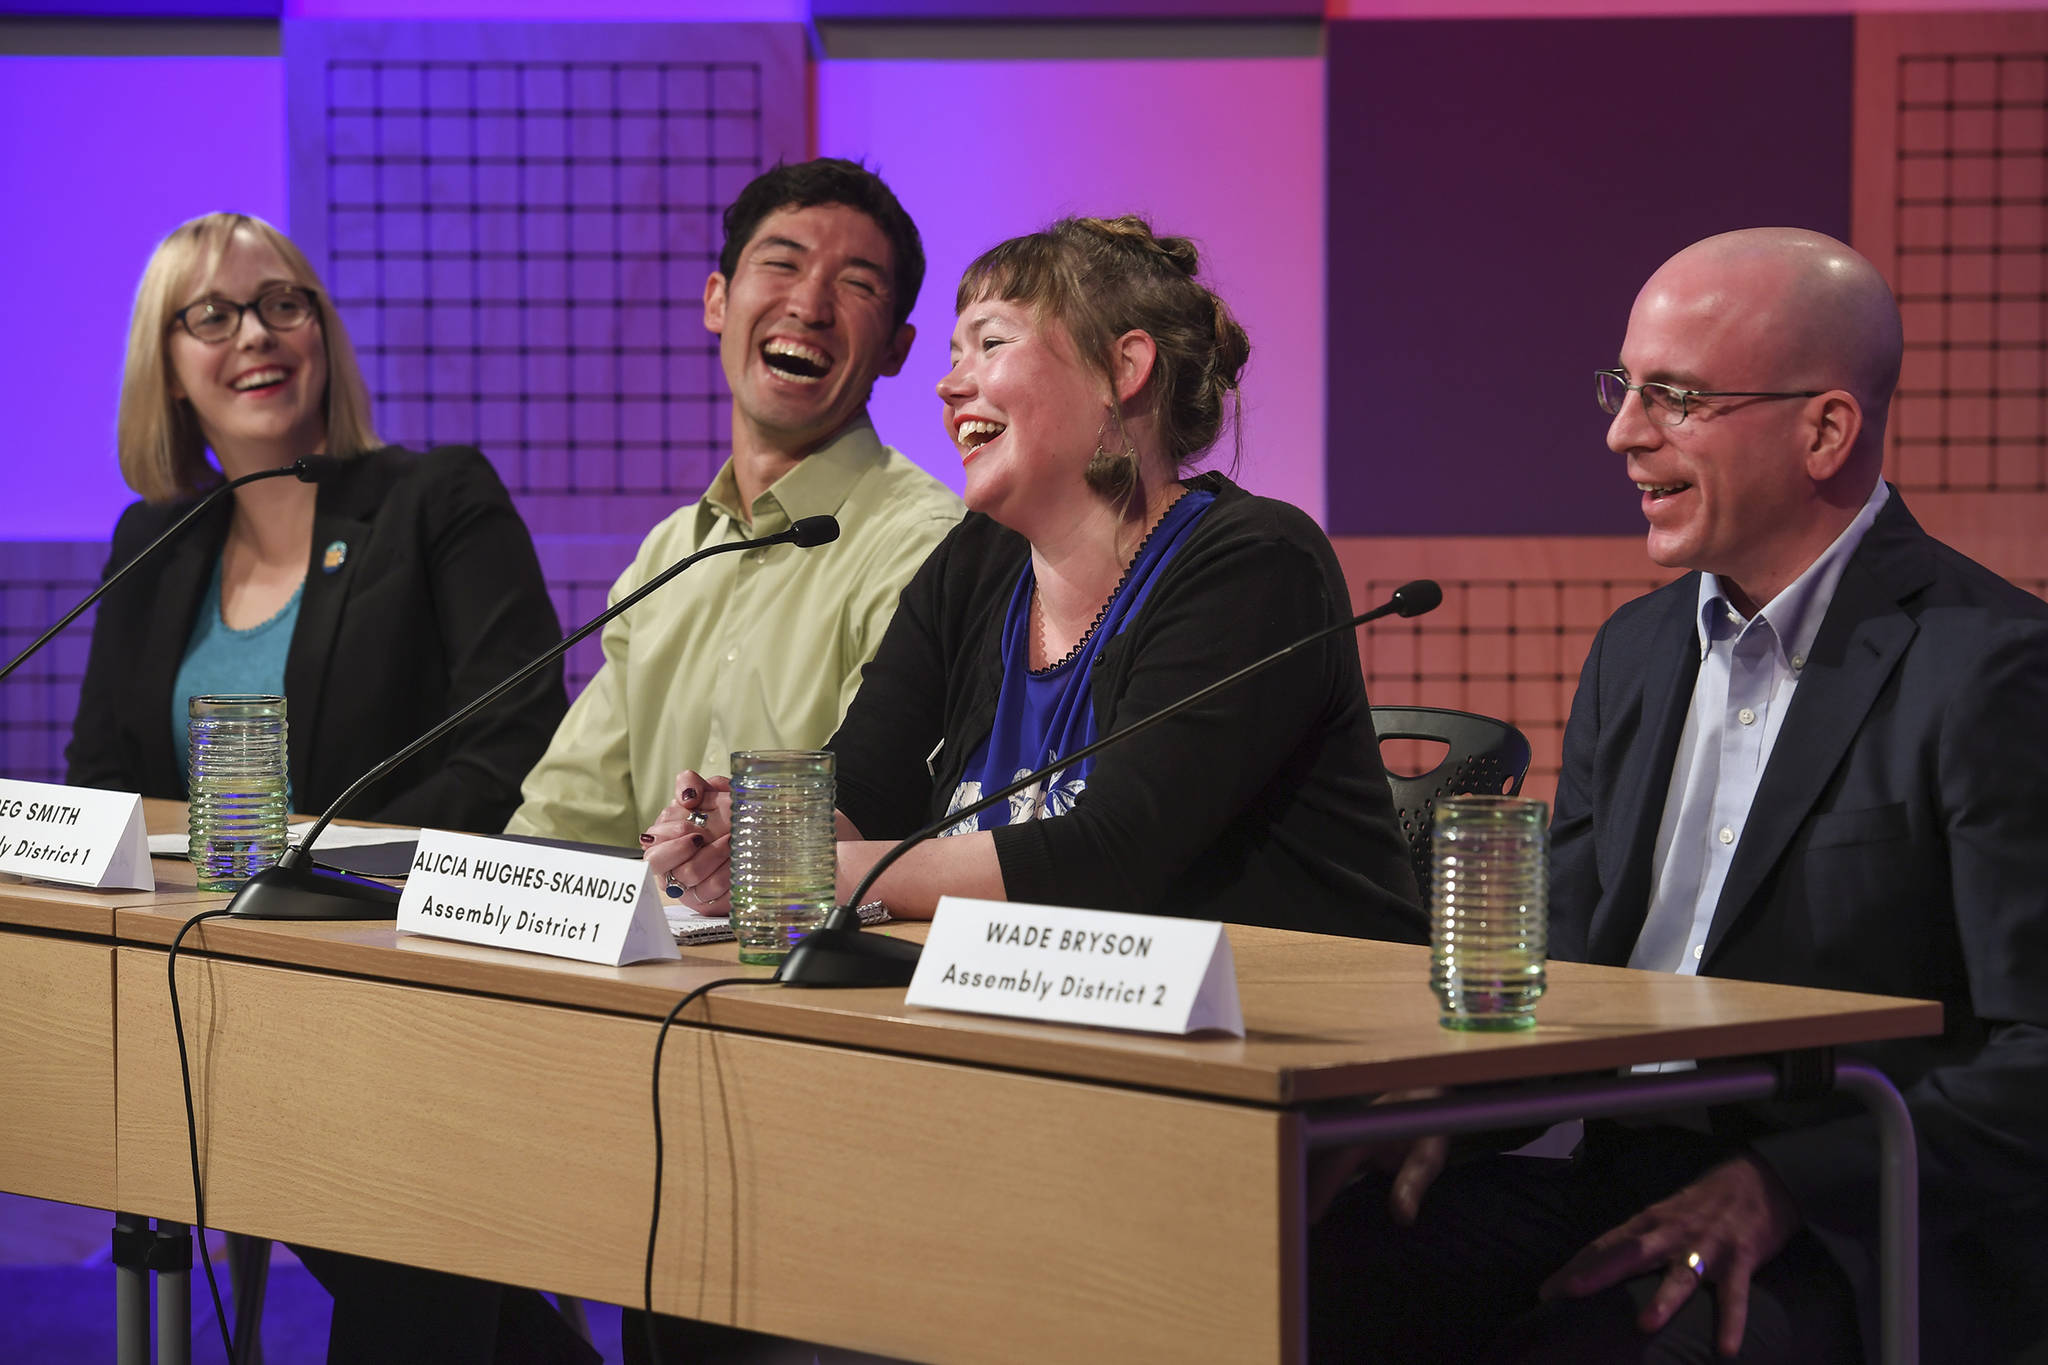 Assembly candidates Carole Triem, left, Greg Smith, Alicia Hughes-Skandijs and Wade Bryson share a light moment during a candidate forum at KTOO on Tuesday, Sept. 17, 2019. The event was sponsored by the Juneau League of Women Voters. (Michael Penn | Juneau Empire)